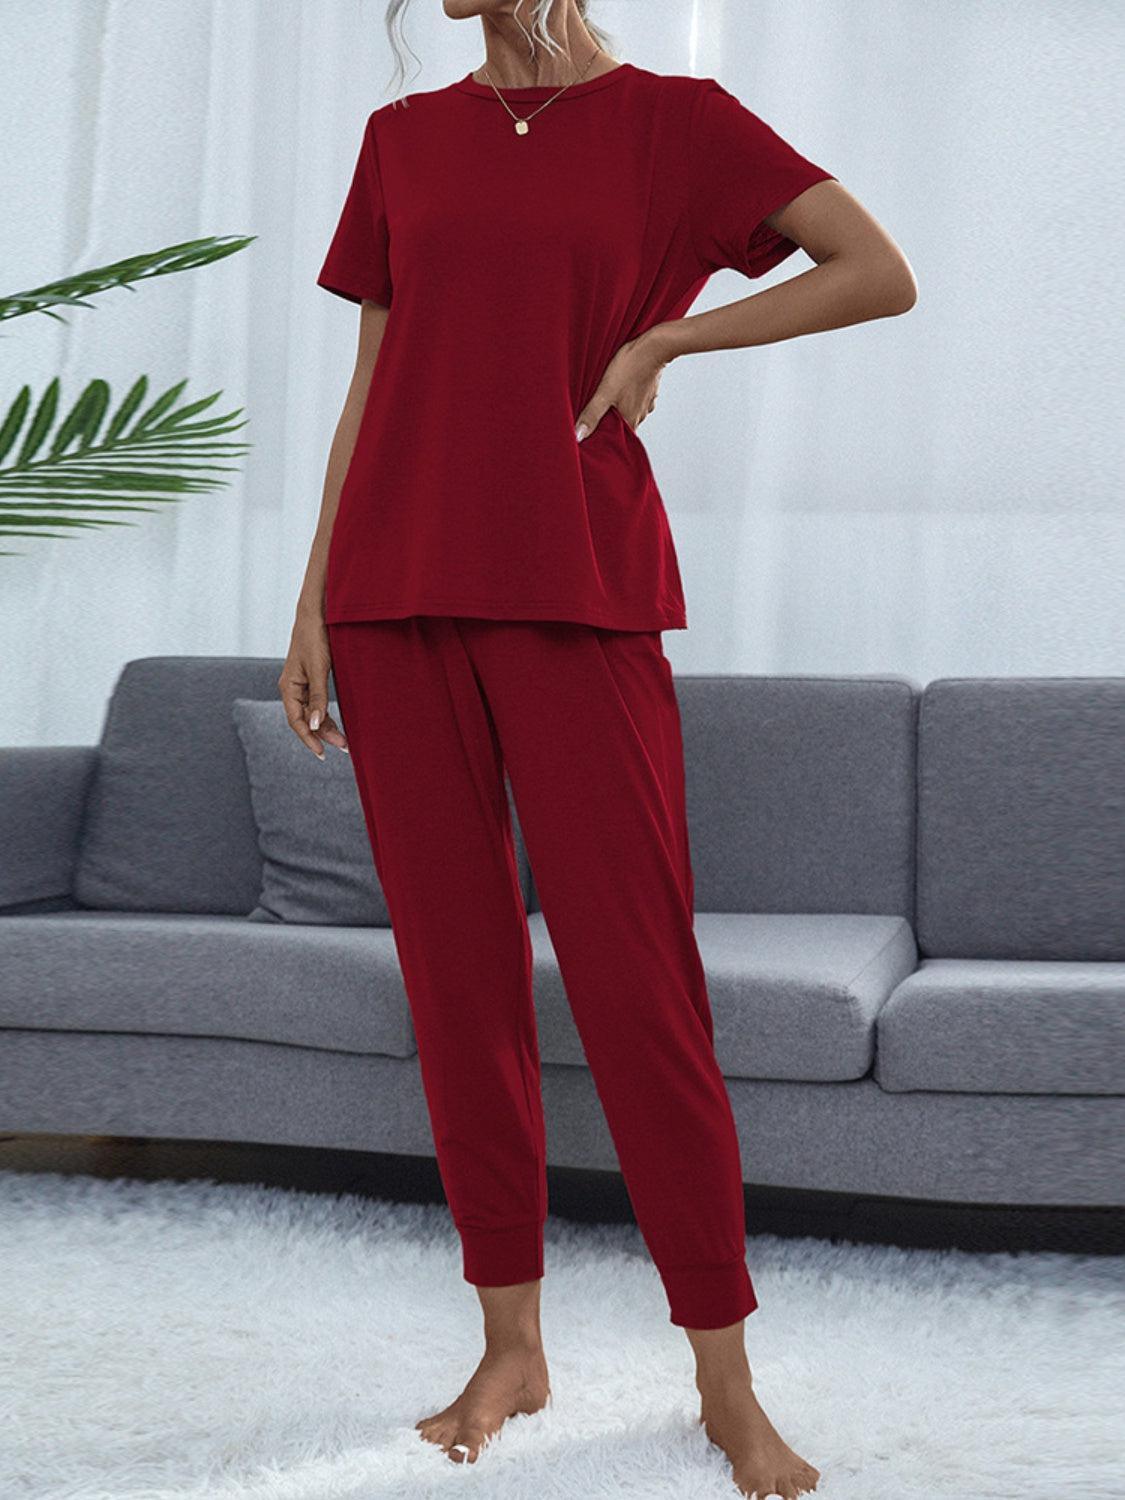 a woman standing in a living room wearing a red top and pants